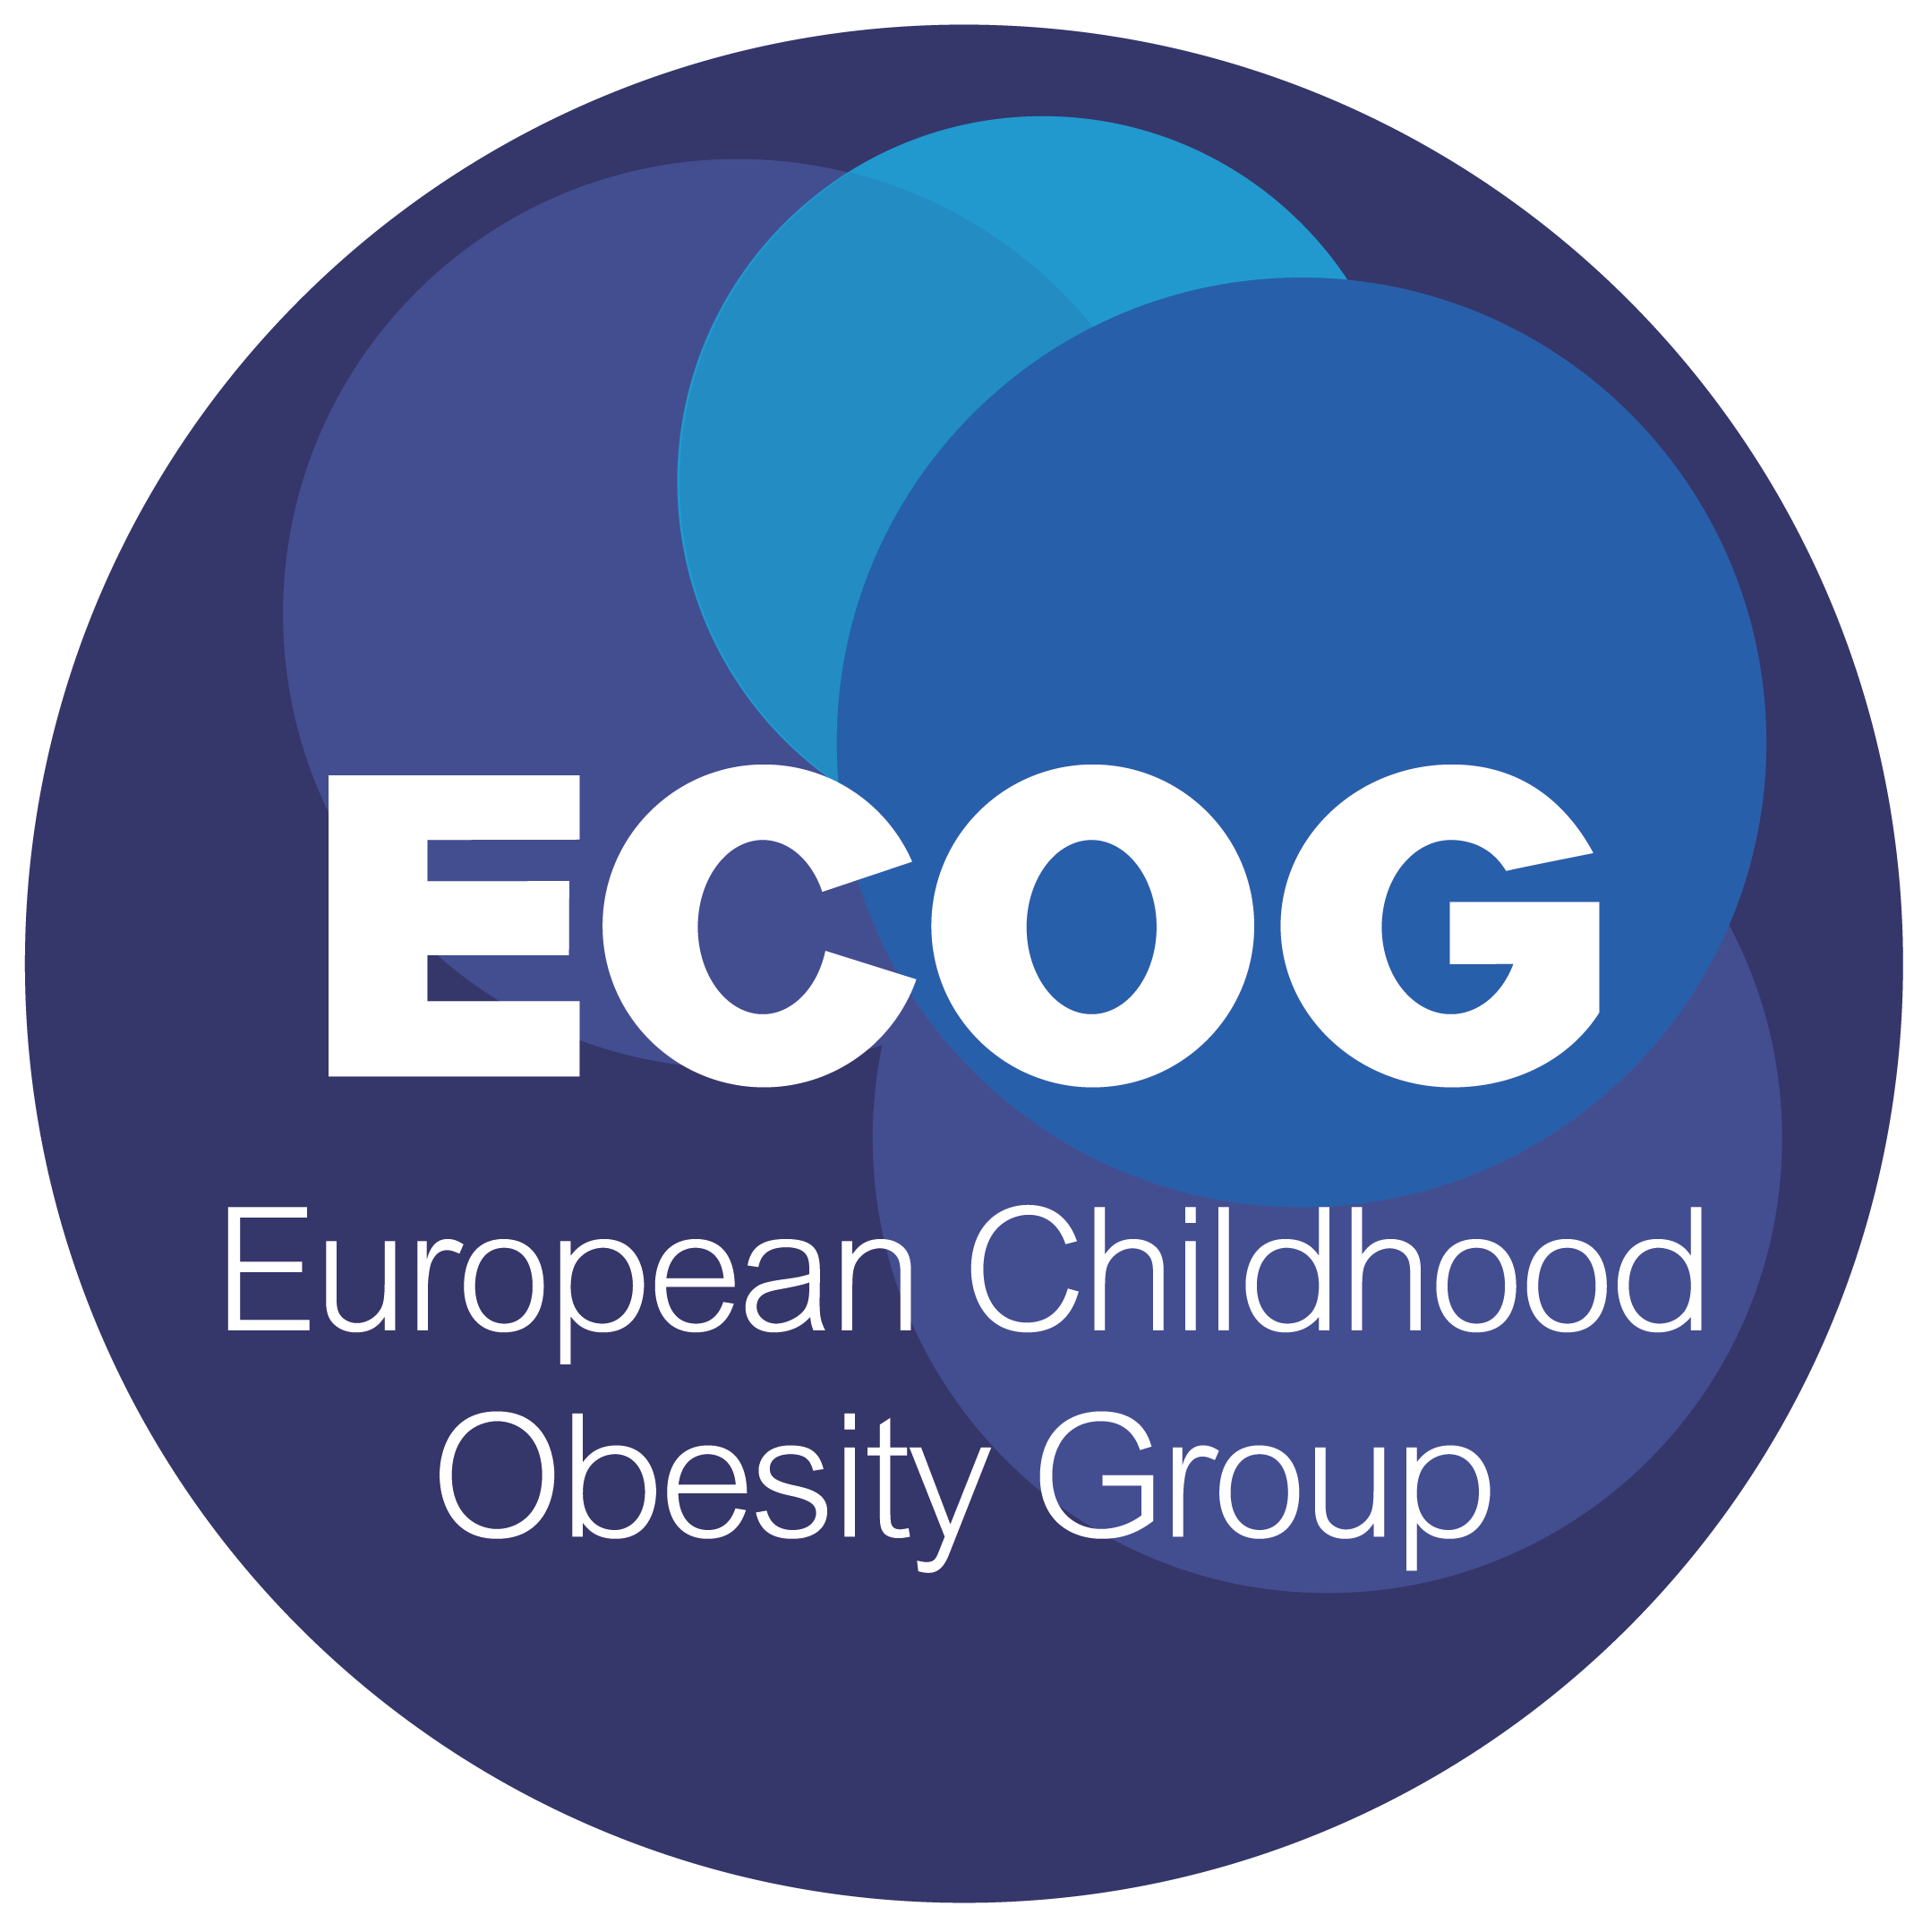 The European Childhood Obesity Group